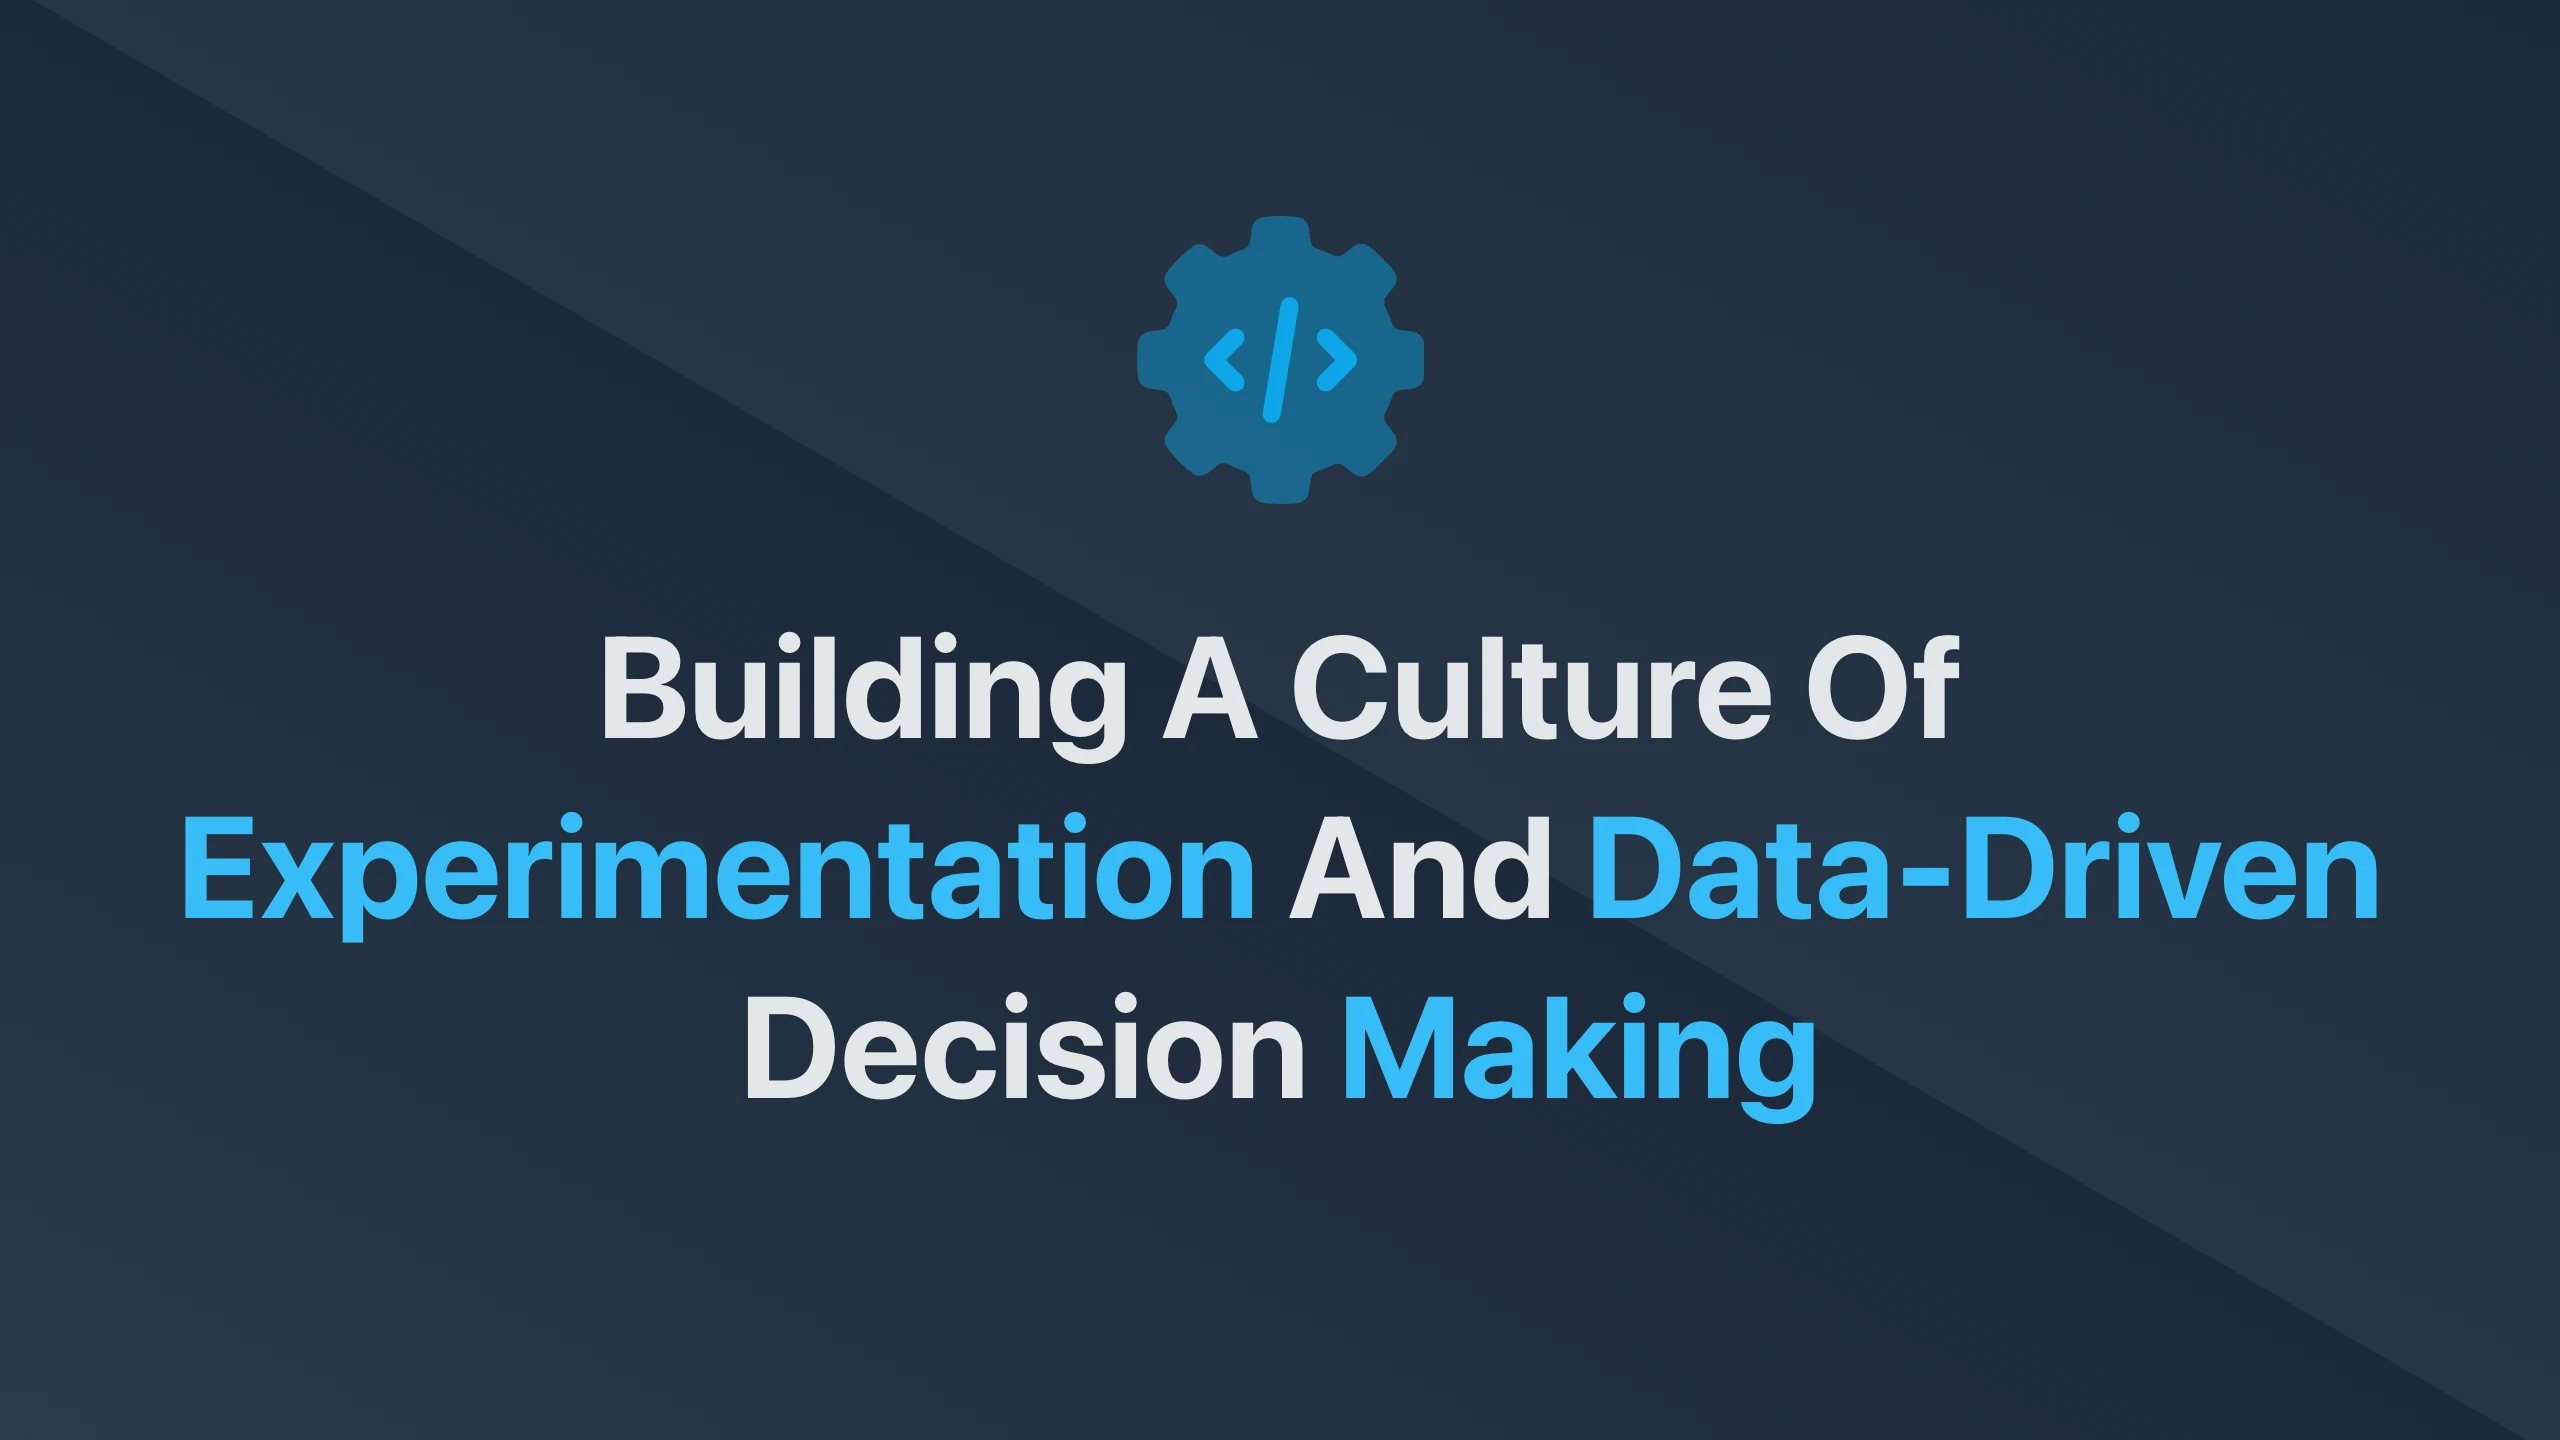 Cover Image for Building a Culture of Experimentation and Data-Driven Decision Making